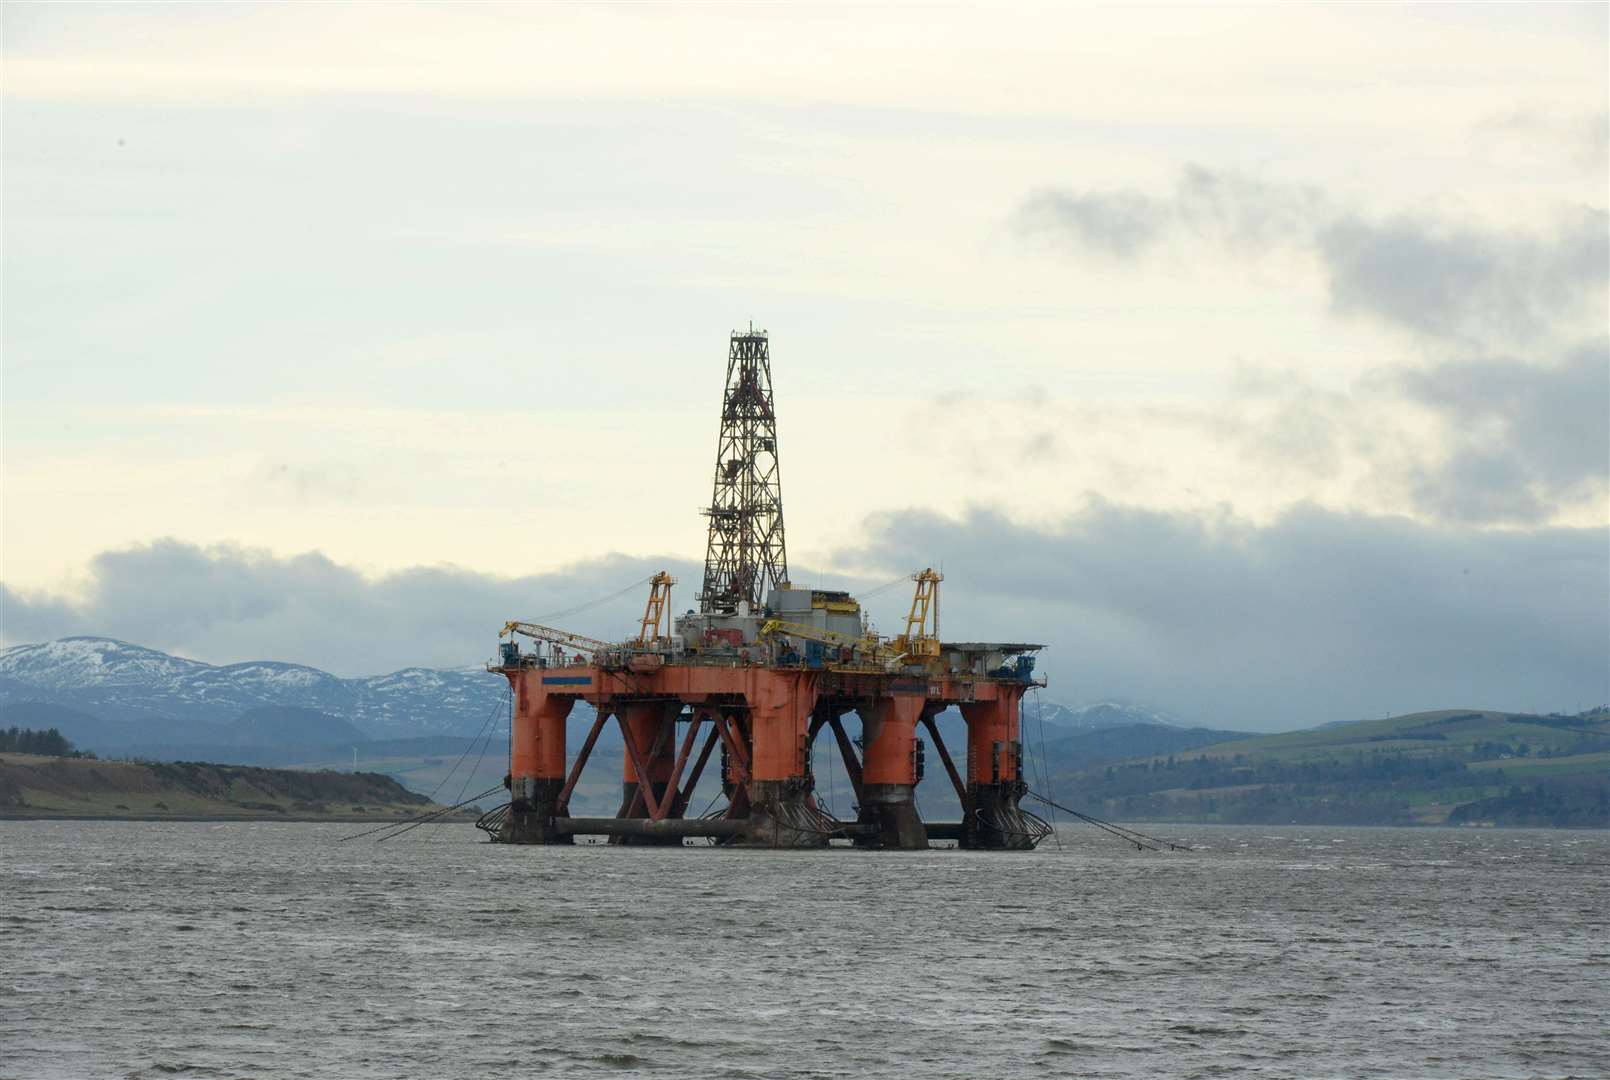 The UK government wants to see more oil and gas exploration in the North Sea.